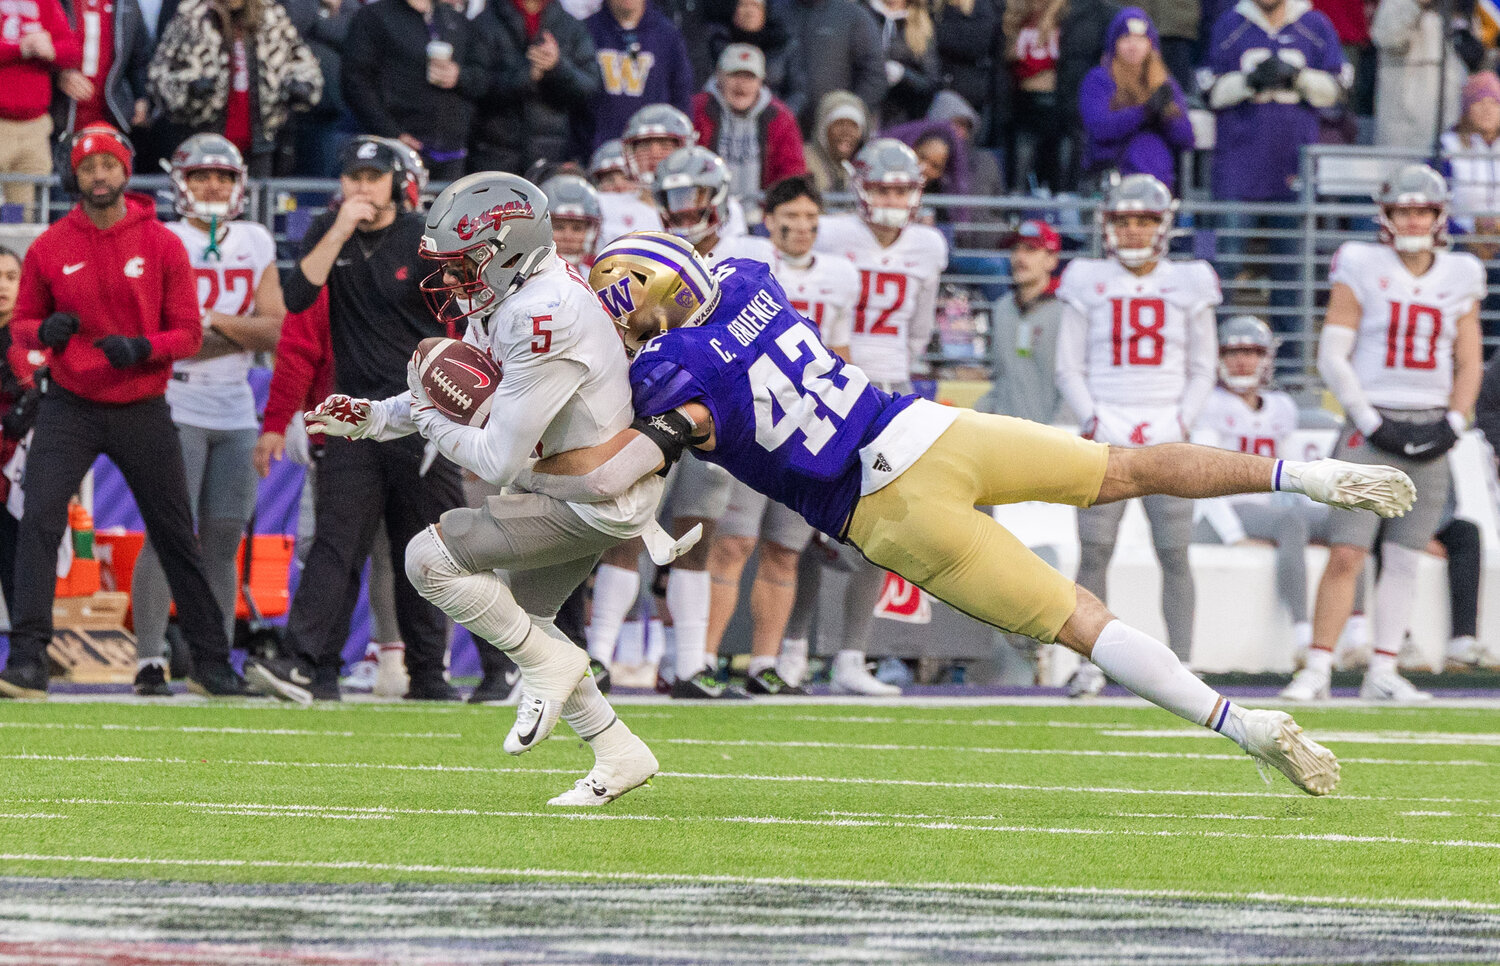 Cougar receiver Lincoln Victor (5) is tackled by Huskies linebacker Carson Bruener (42) during the Boeing Apple Cup Series football game in Seattle on Saturday, Nov. 25.